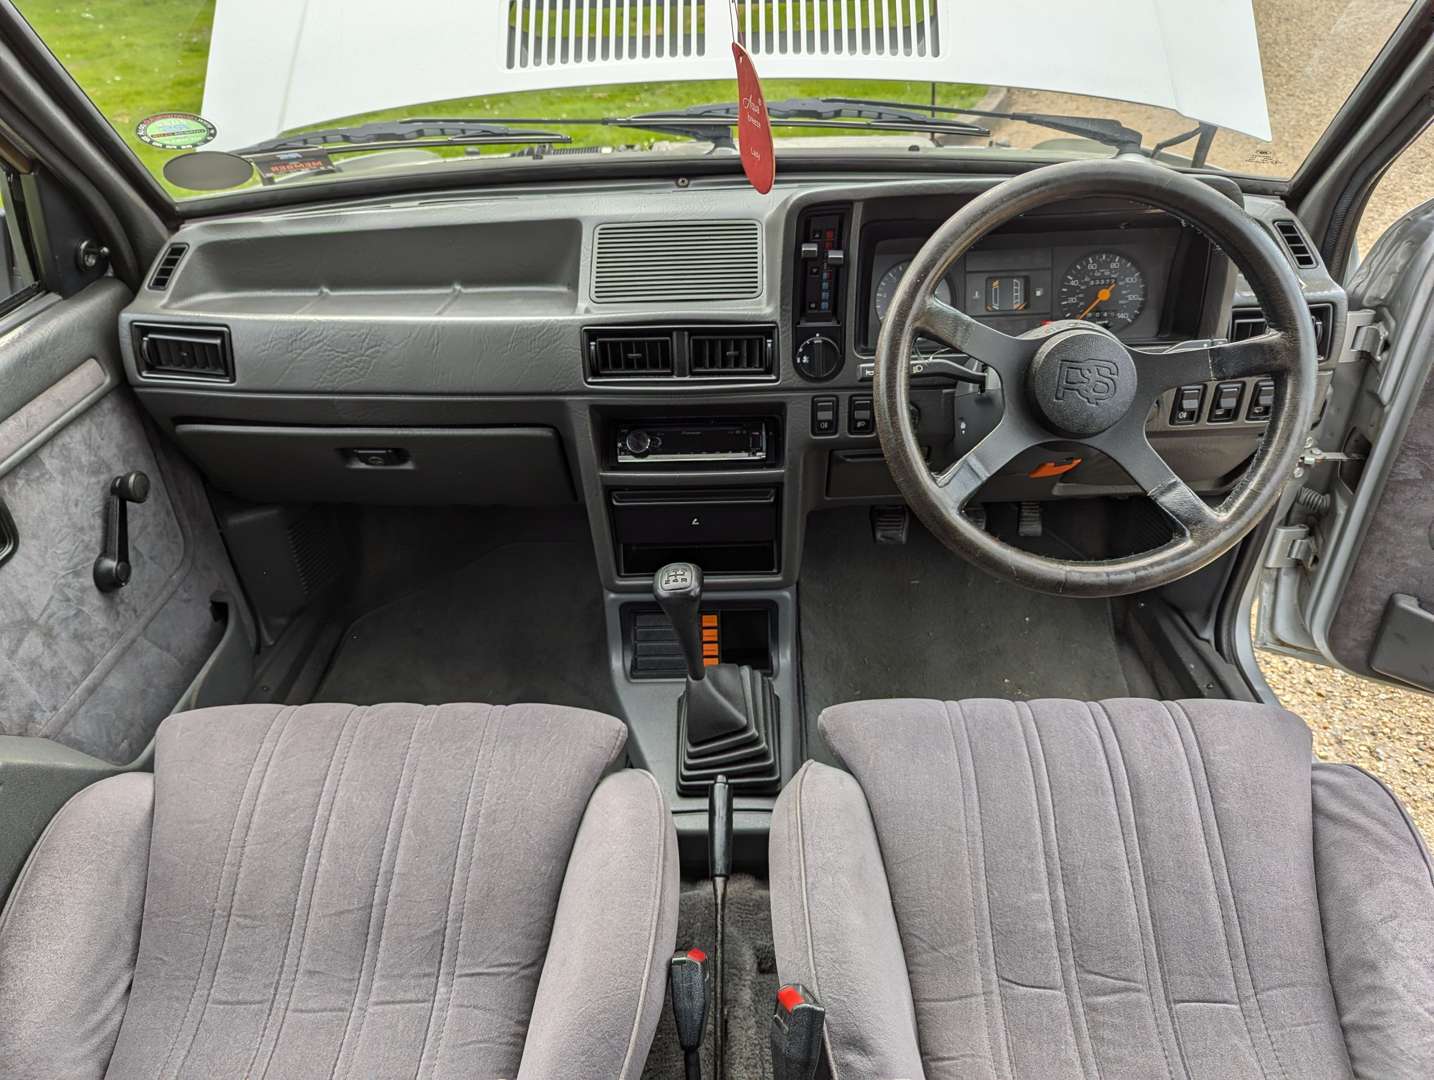 <p>1982 FORD ESCORT RS 1600I</p>